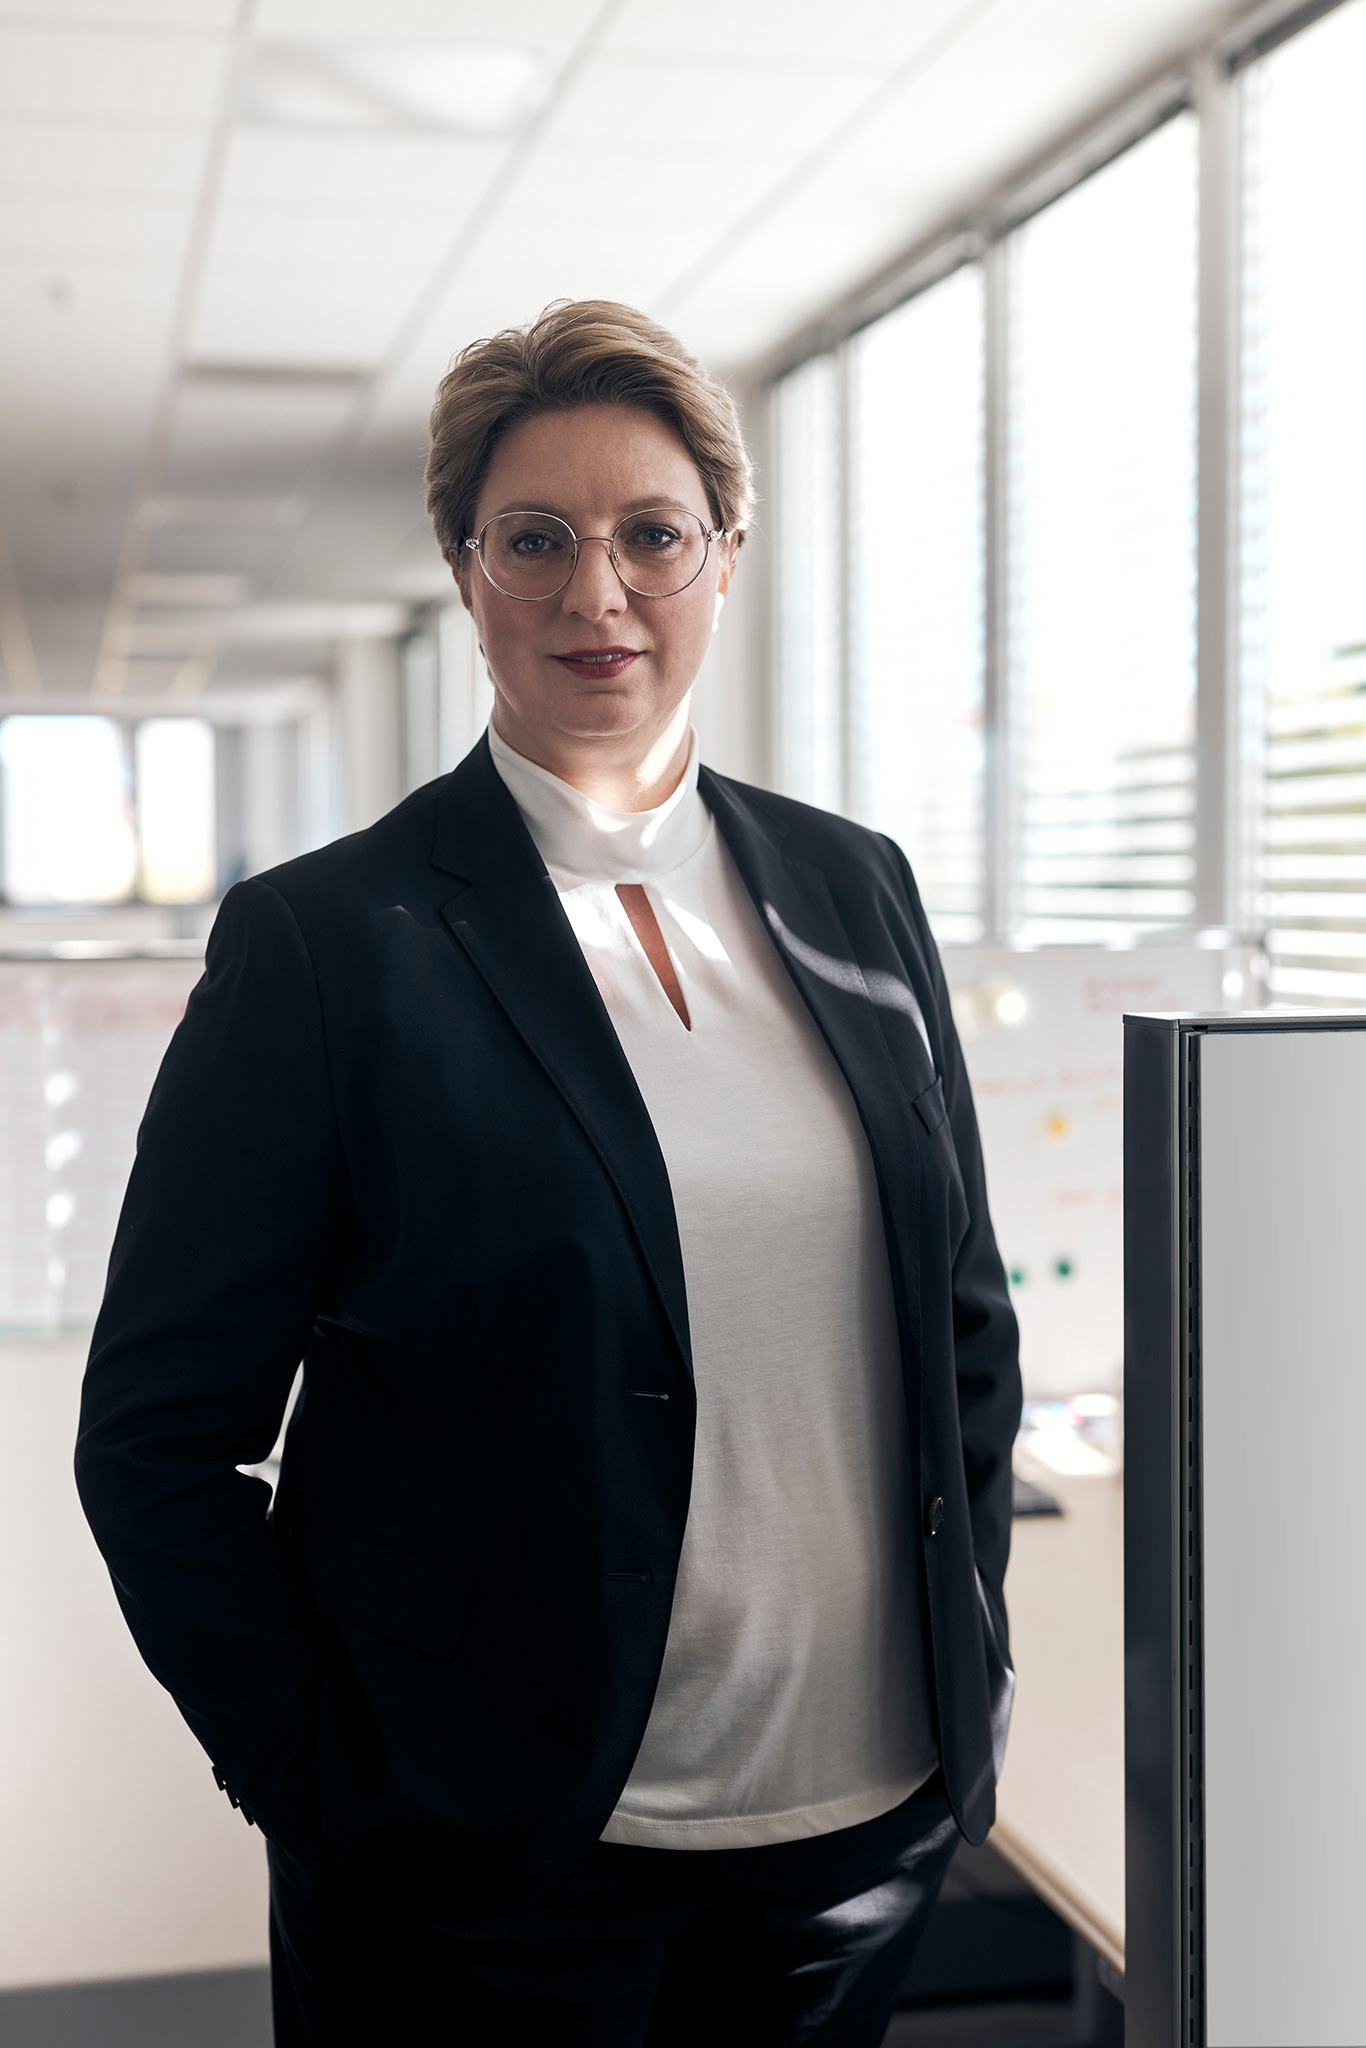 Corporate portrait shoot with Sonja Pierer at Intel Germany